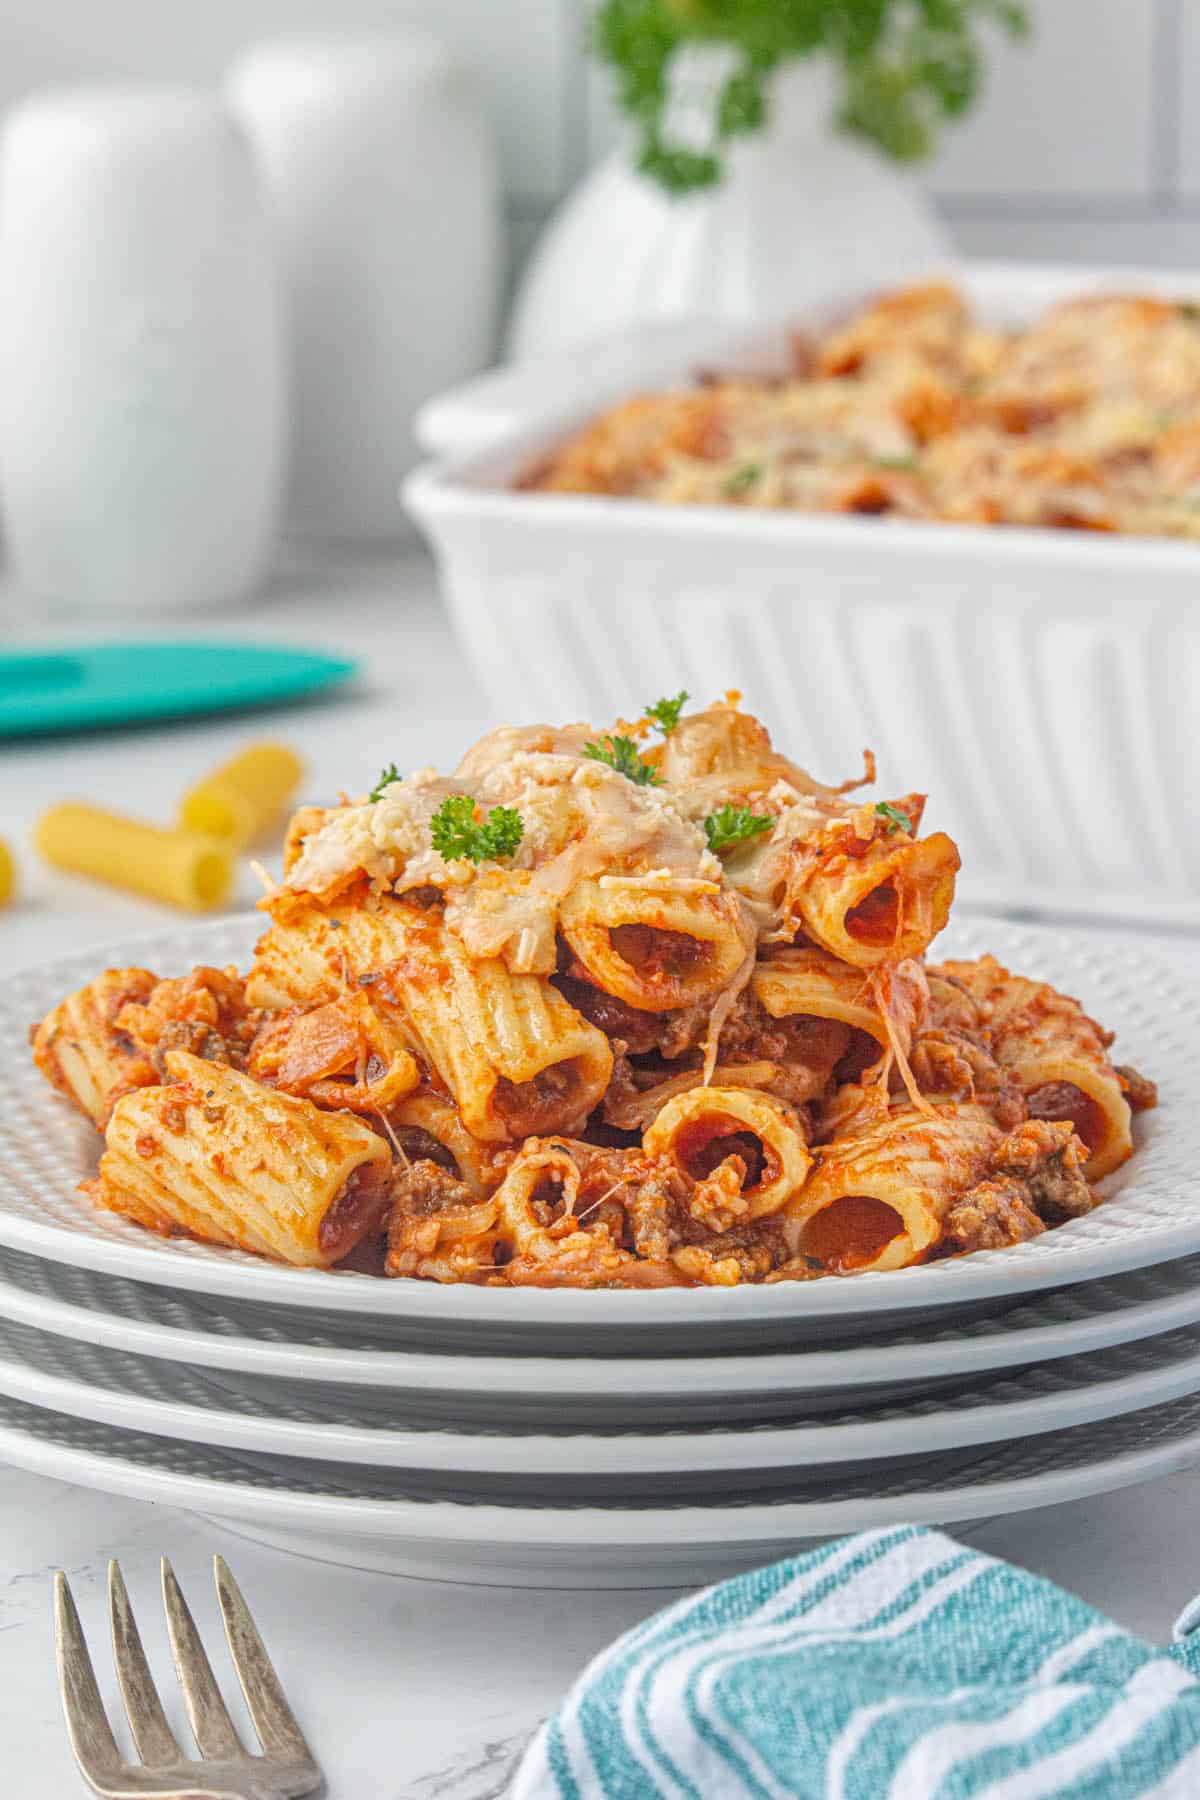 A big serving of a cheesy pasta casserole on a plate.